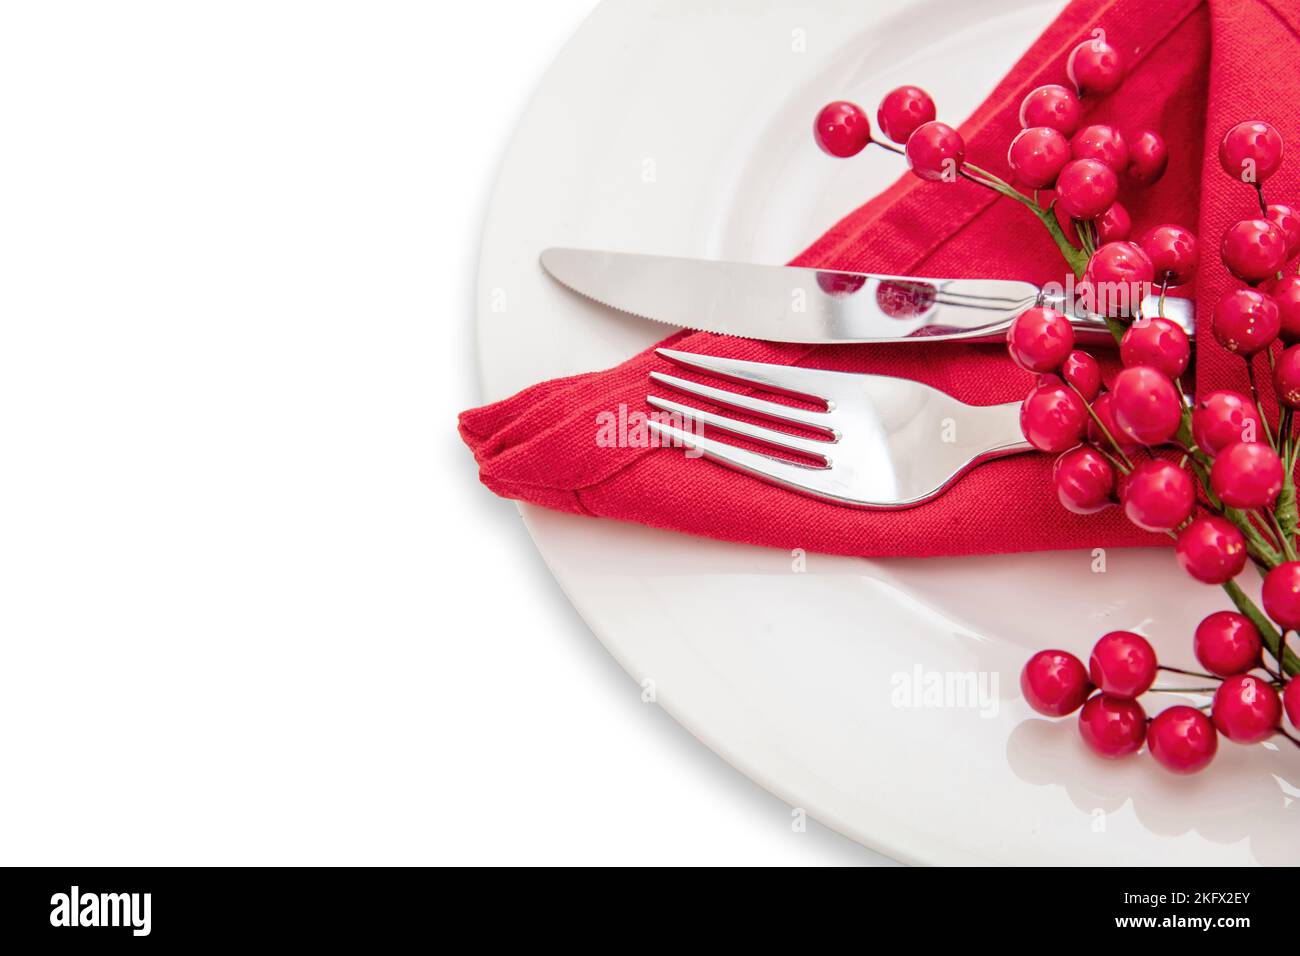 Holiday table setting. Silver Cutlery and red cloth napkin on white plate, close up view. Christmas New Year celebration dinner Stock Photo